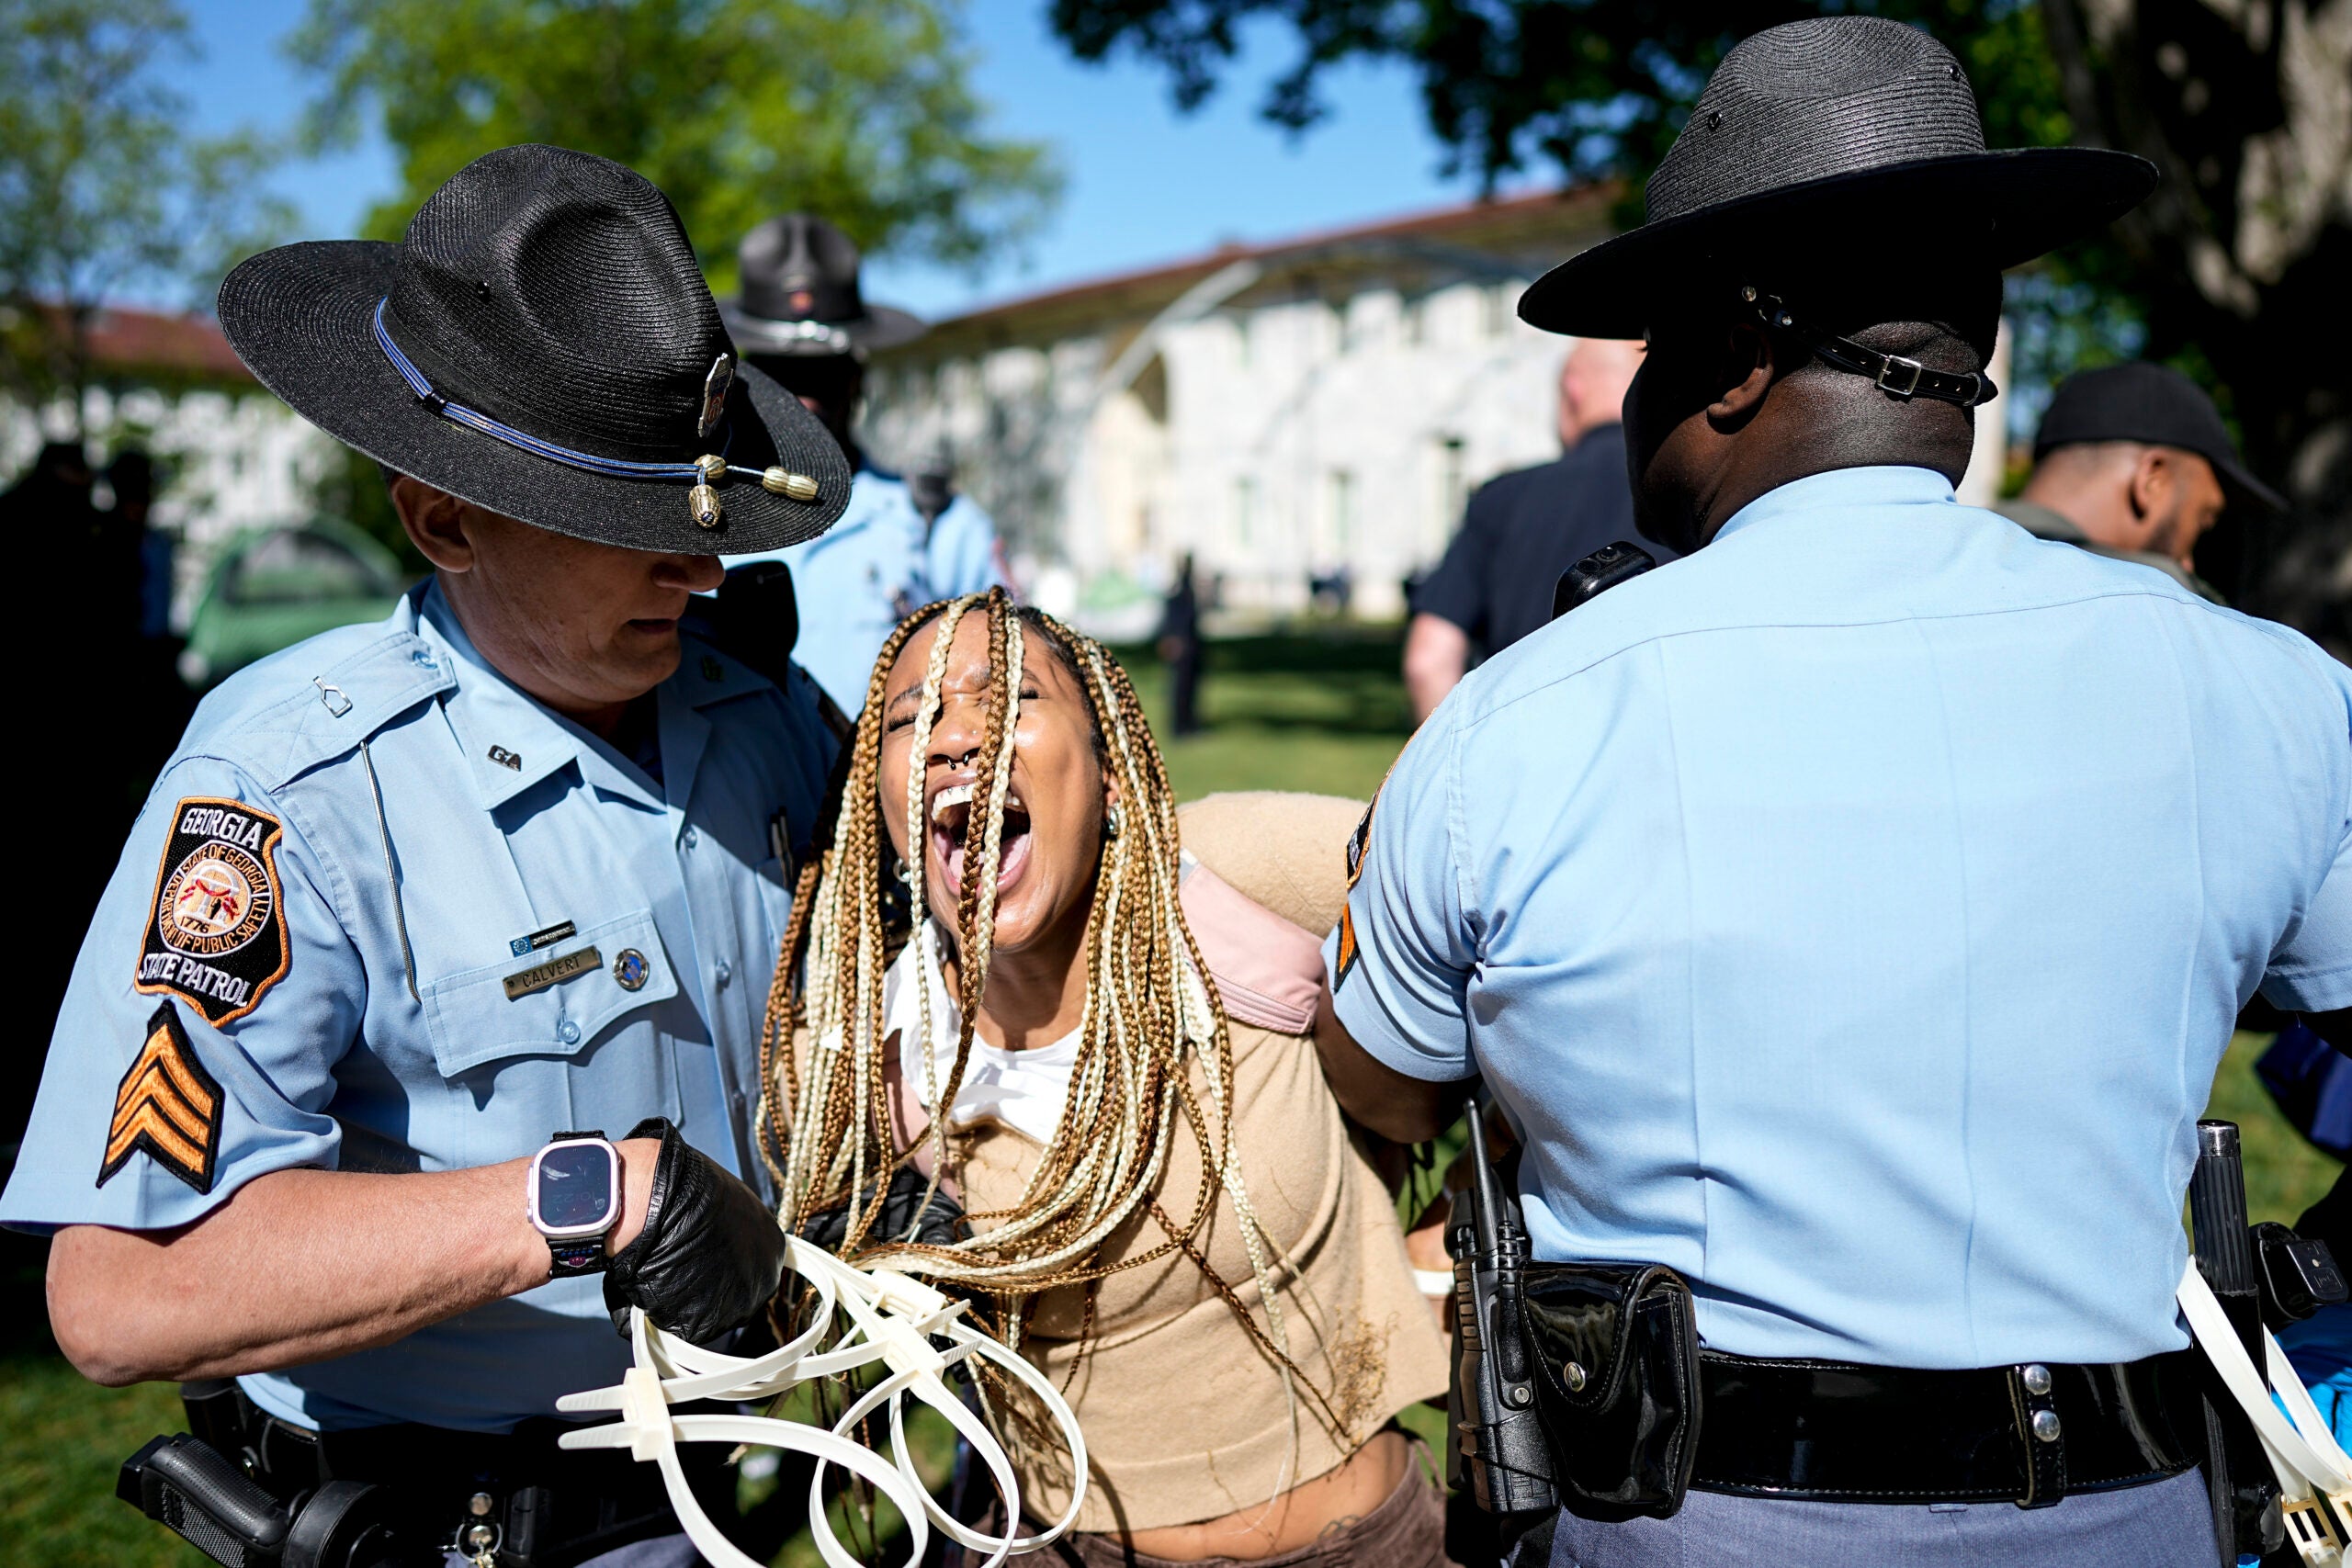 Georgia State Patrol officers detain a demonstrator on the campus of Emory University.